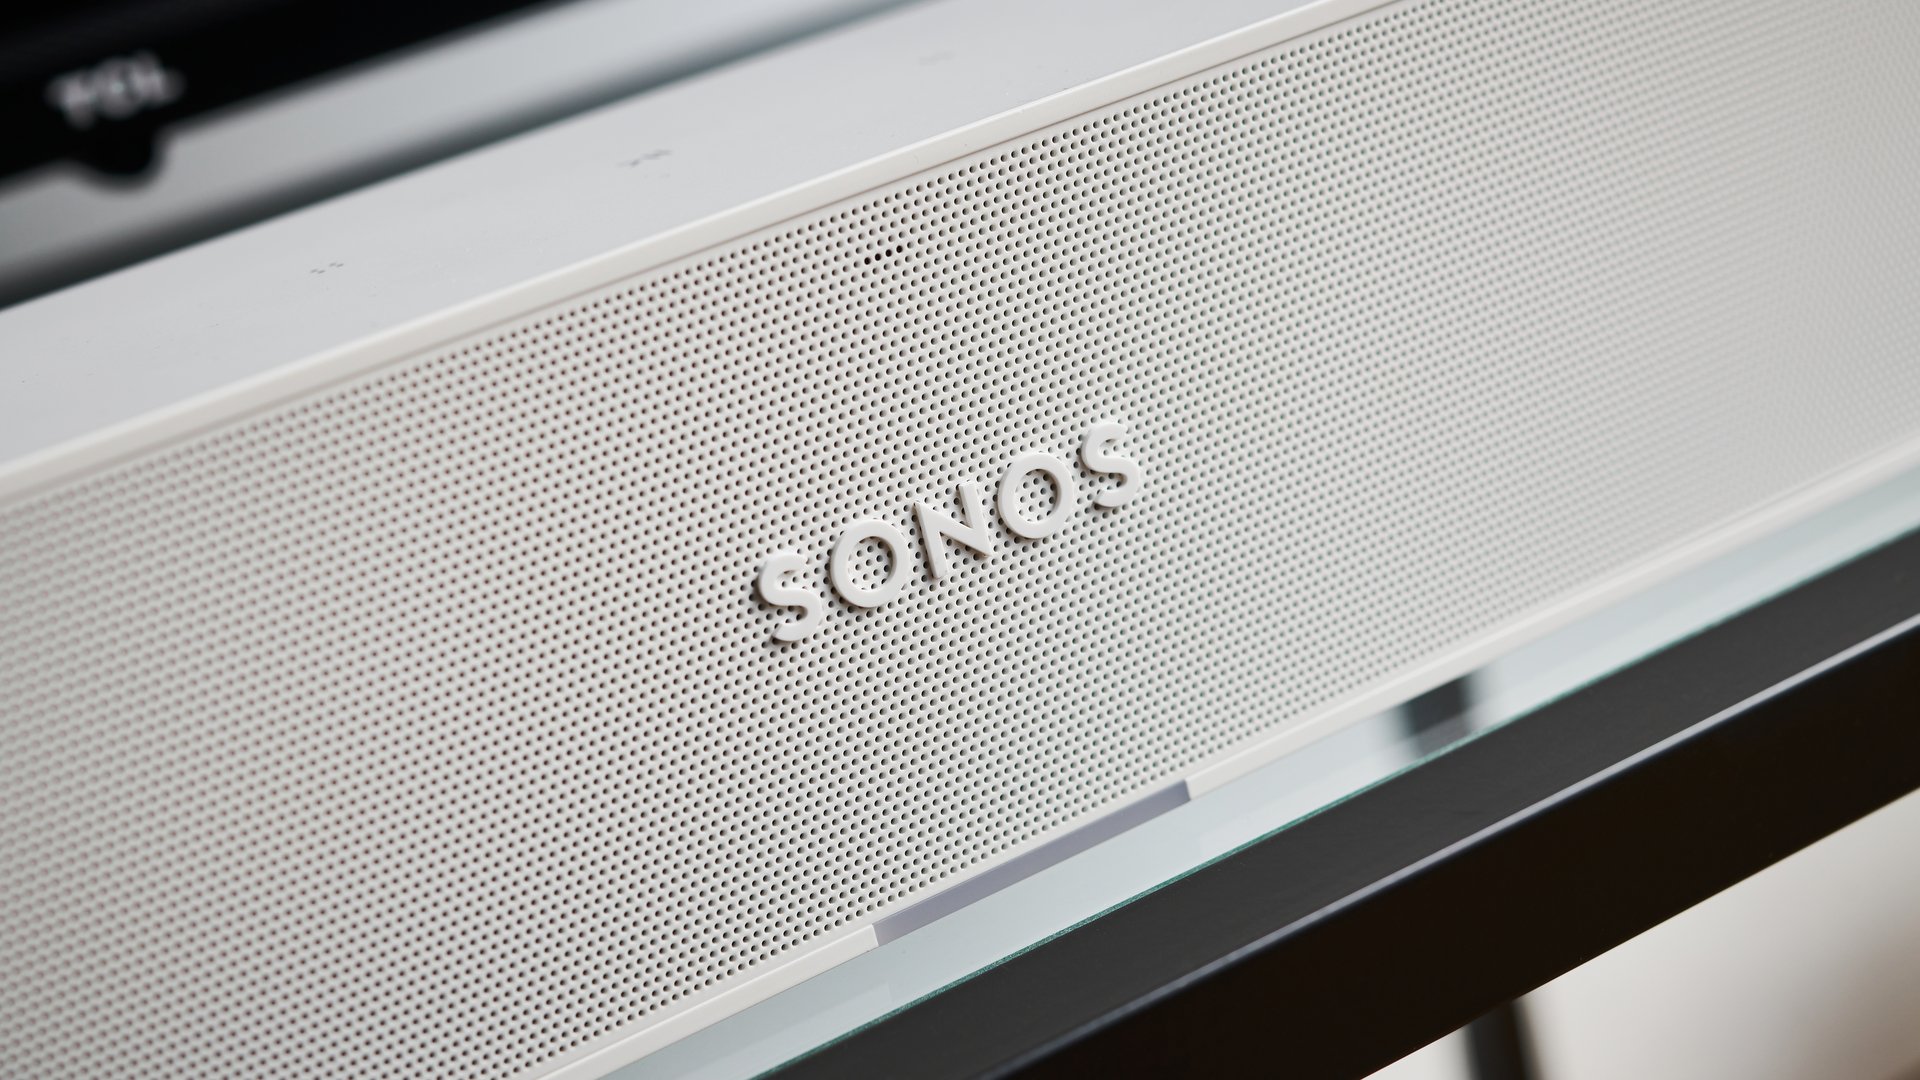 Sonos Ray on a glass shelf in the living room